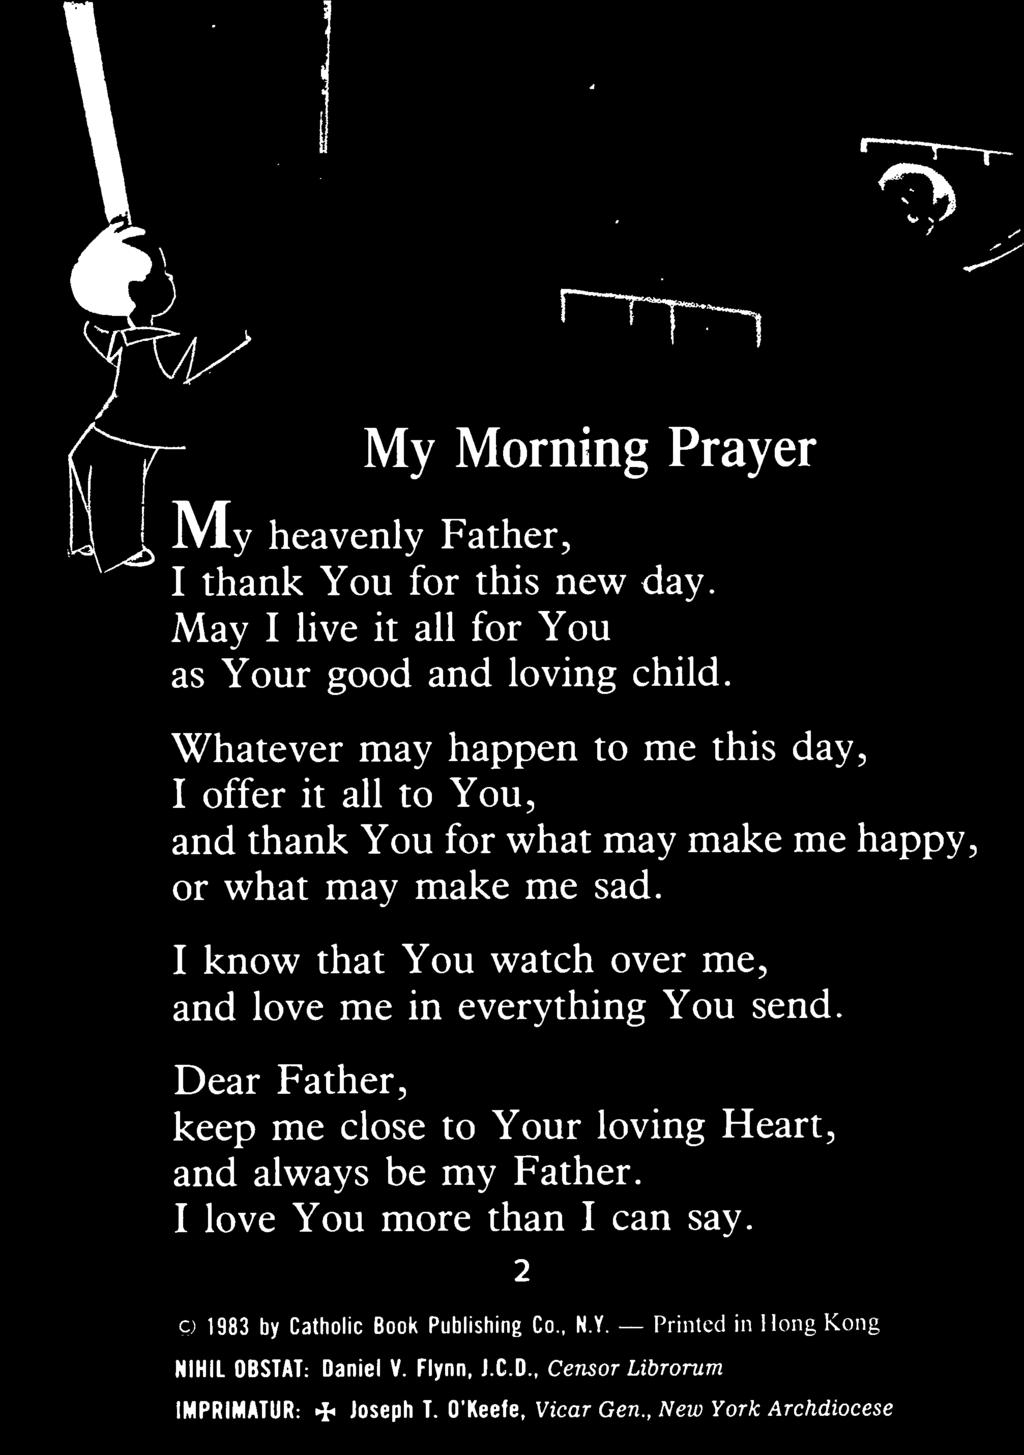 Dear Father, keep me close to Your loving Heart, and always be my Father.